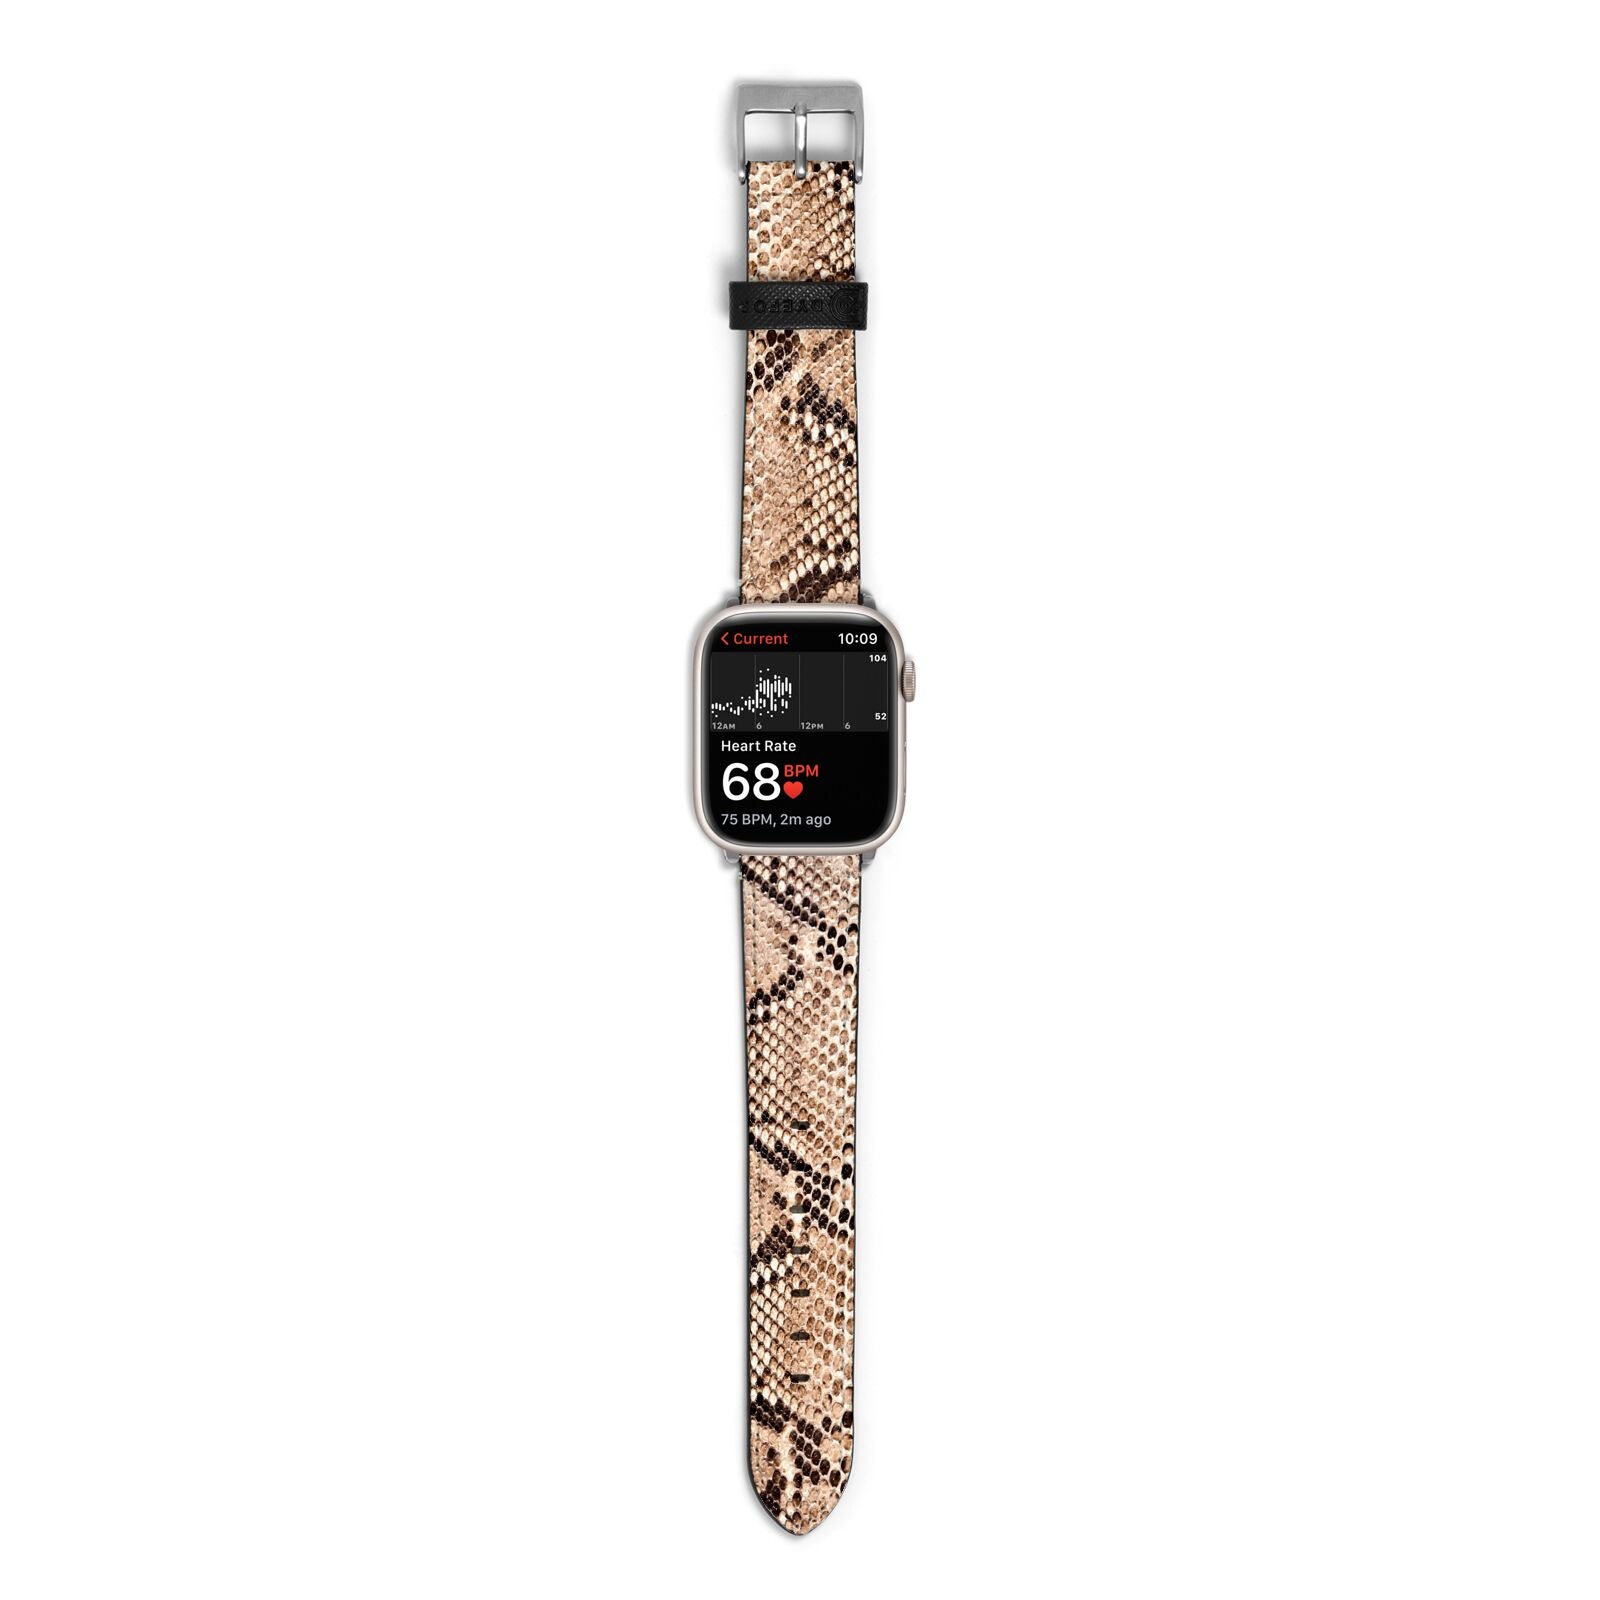 Snakeskin Apple Watch Strap Size 38mm with Silver Hardware